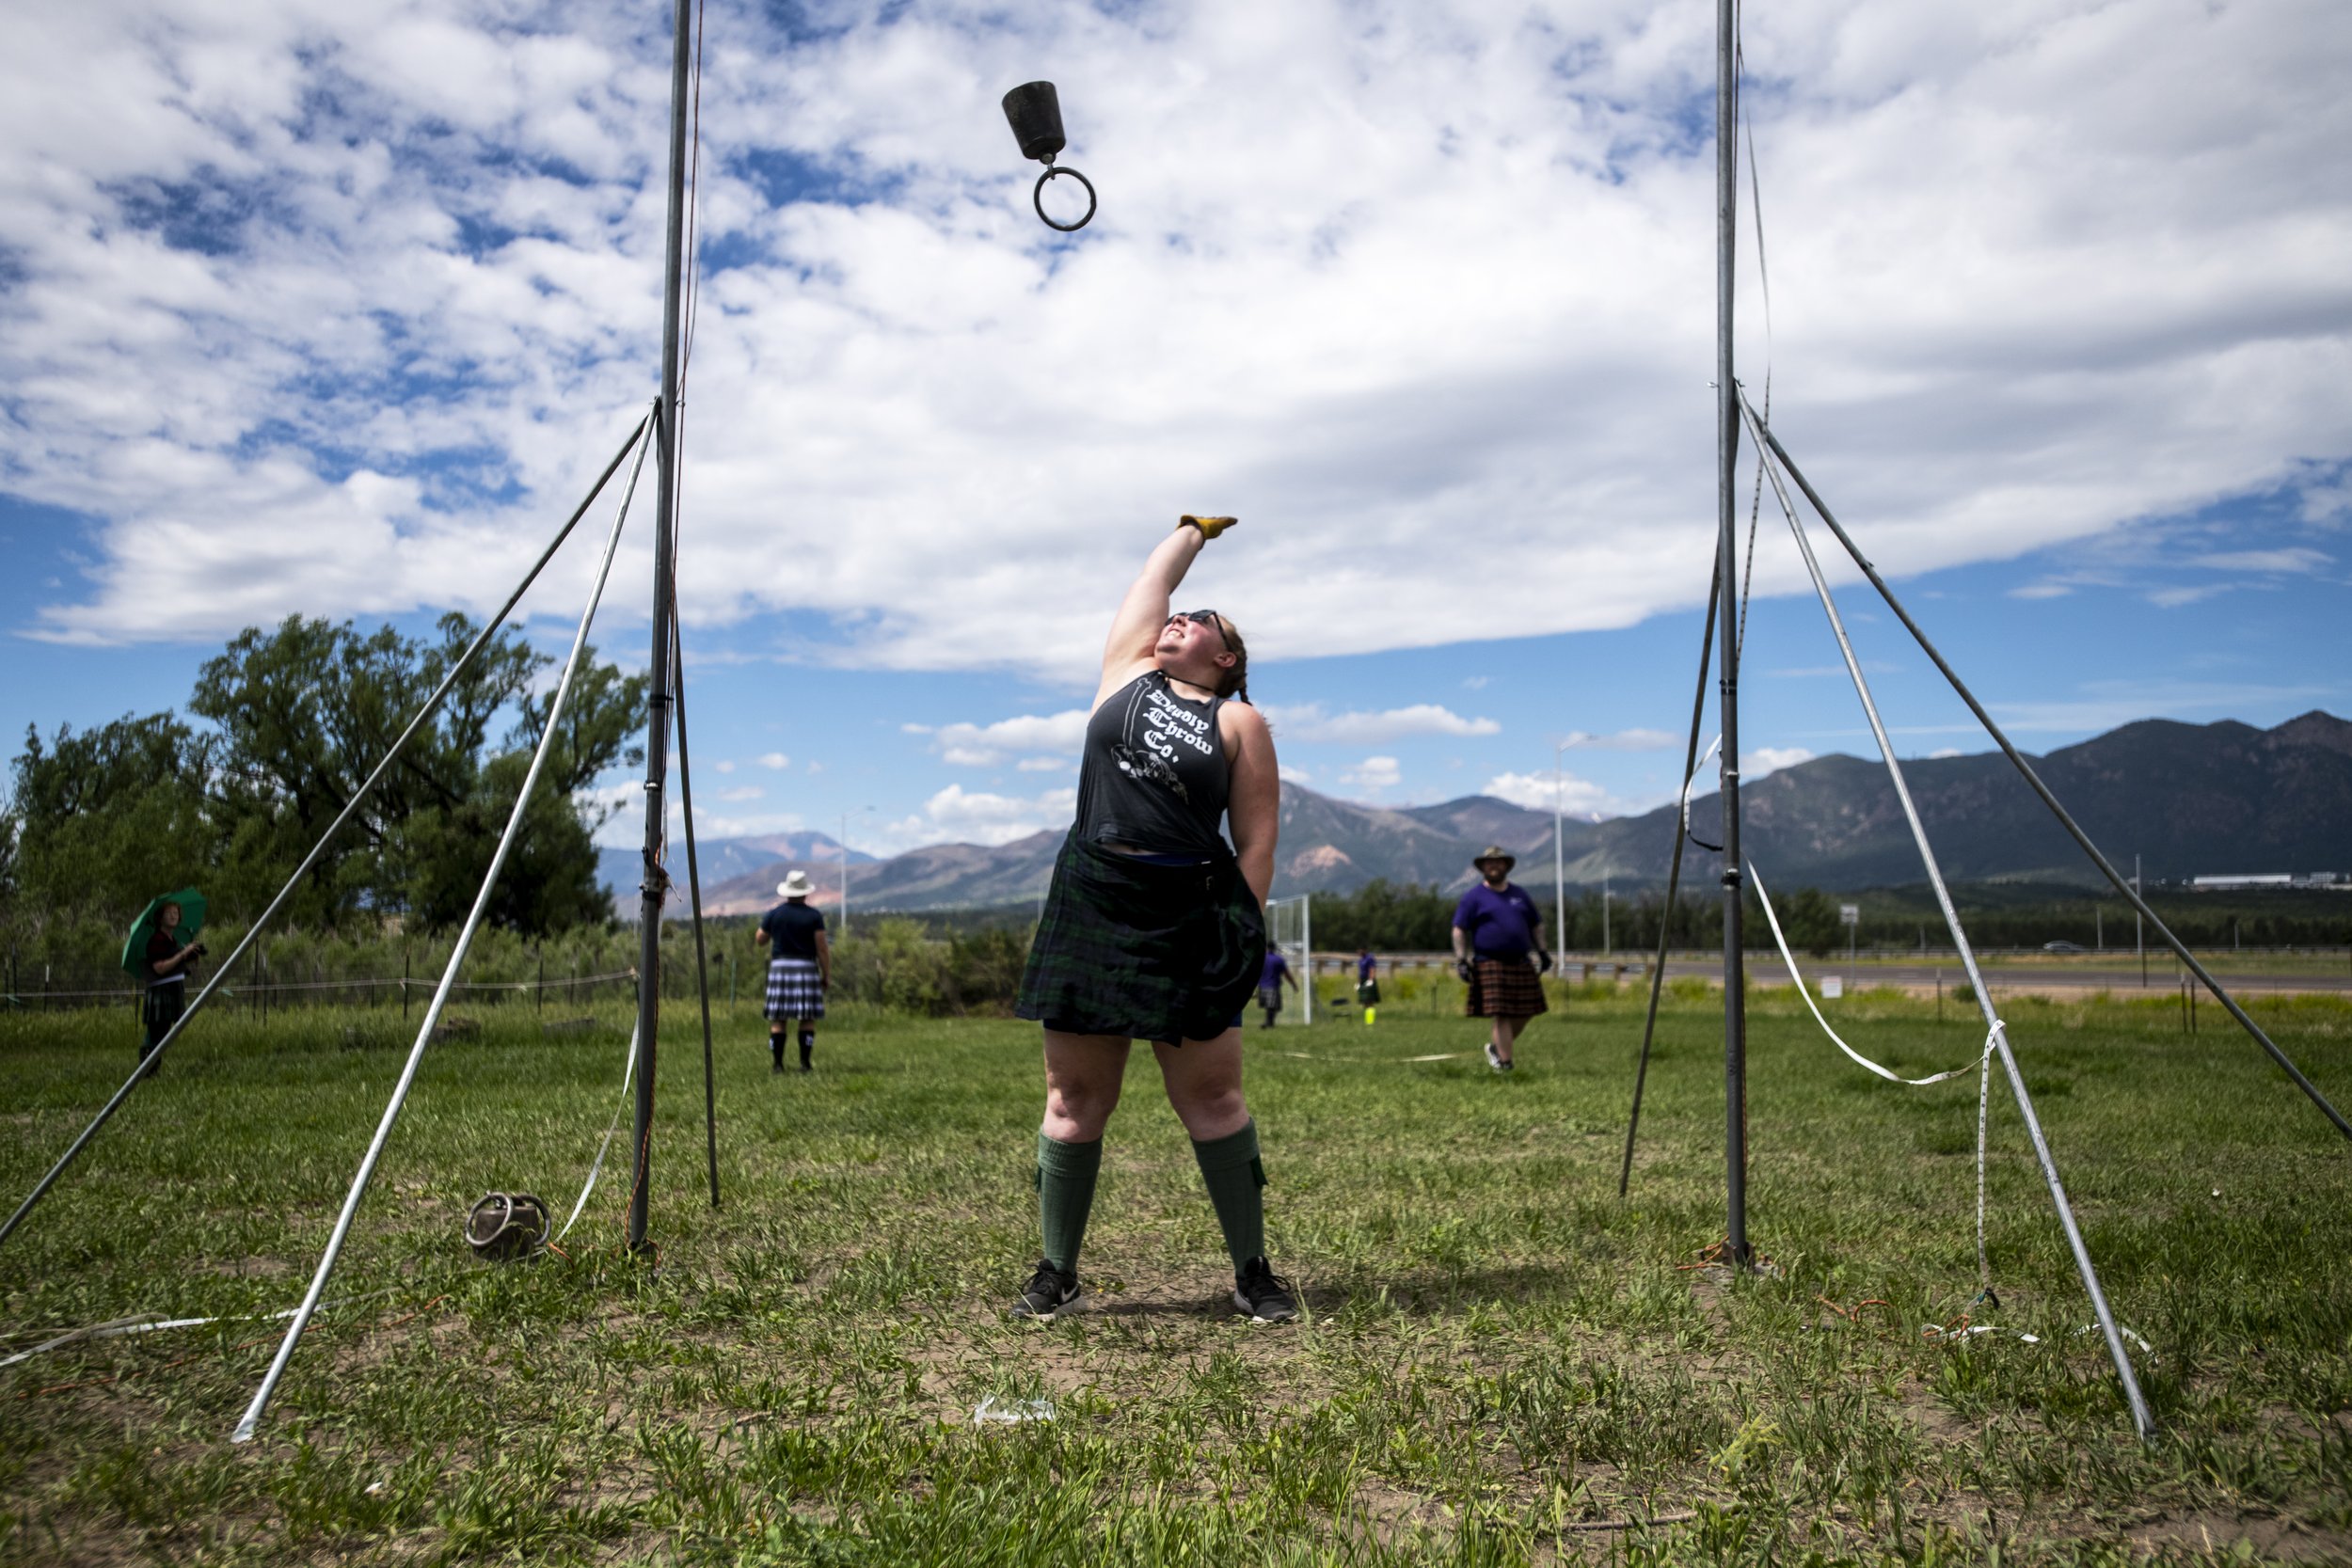  Hazel George throws during the weight for height competition Saturday, June 18, 2022, at the Pikes Peak Celtic Festival at the Western Museum of Mining and Industry in Colorado Springs, Colo. 